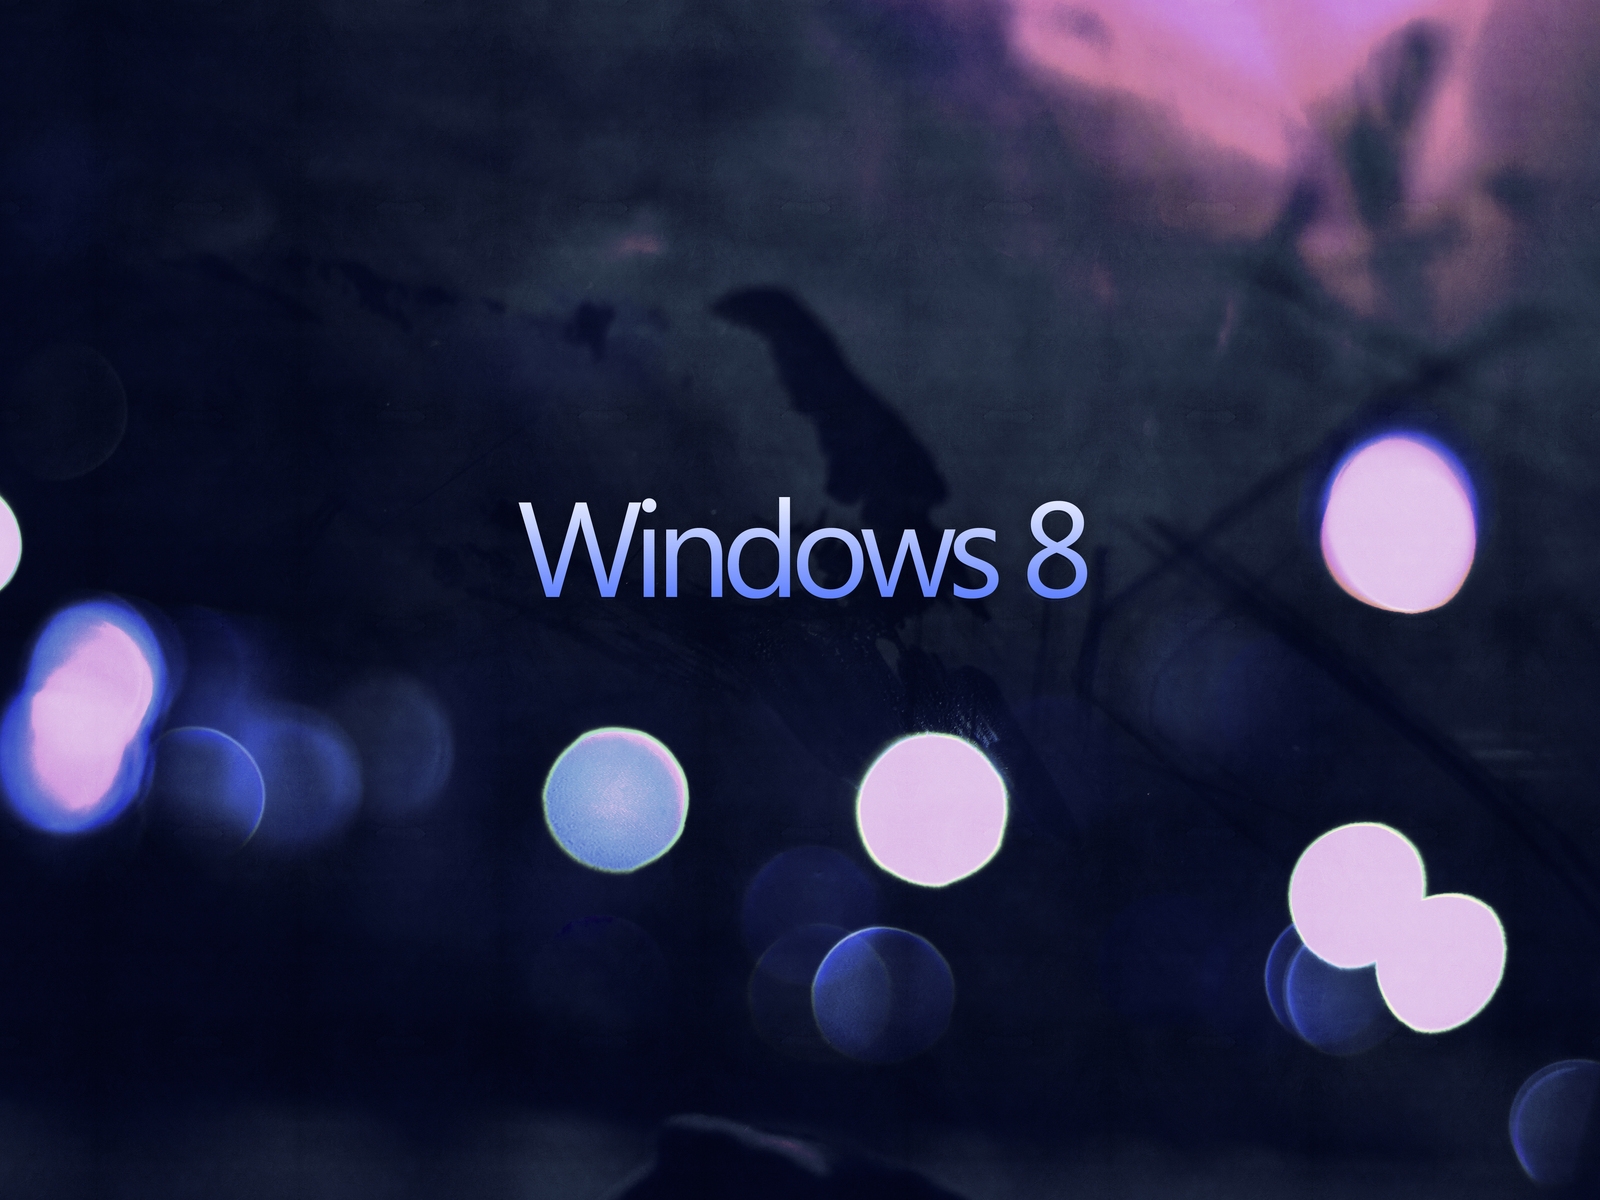 Simple Windows 8 for 1600 x 1200 resolution